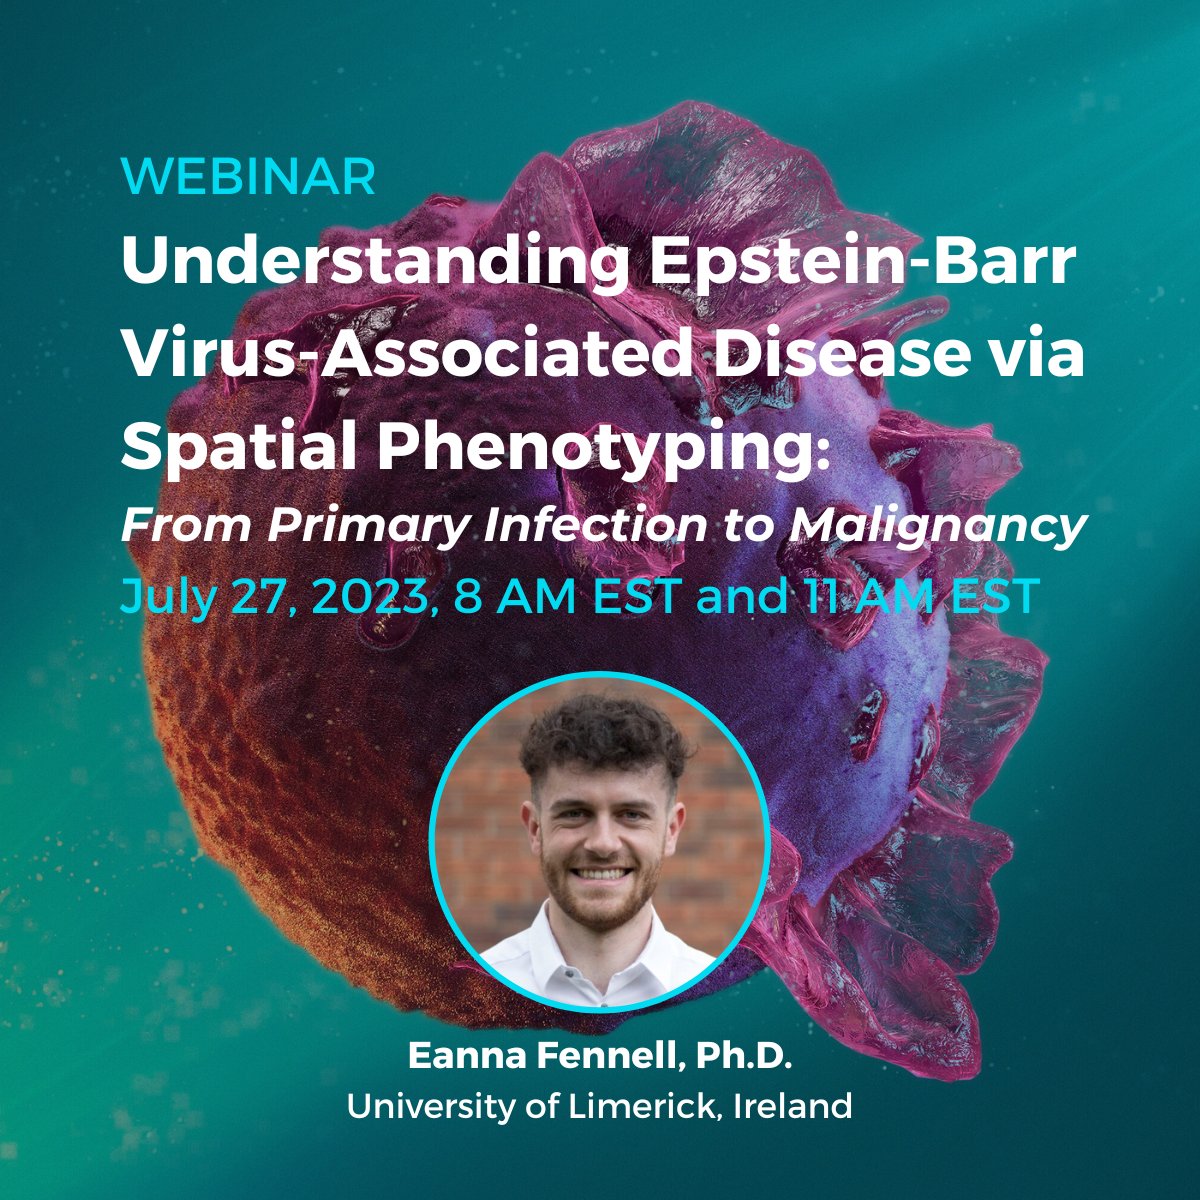 📢 Don't forget to tune in tomorrow, July 27th, to hear @EannaFennell of @UL address how #spatialphenotyping is uniquely suited to outline one of the putative causative relationships between #epsteinbarrvirus infections, immunosuppression, and cancer. bit.ly/3O8BhJ1